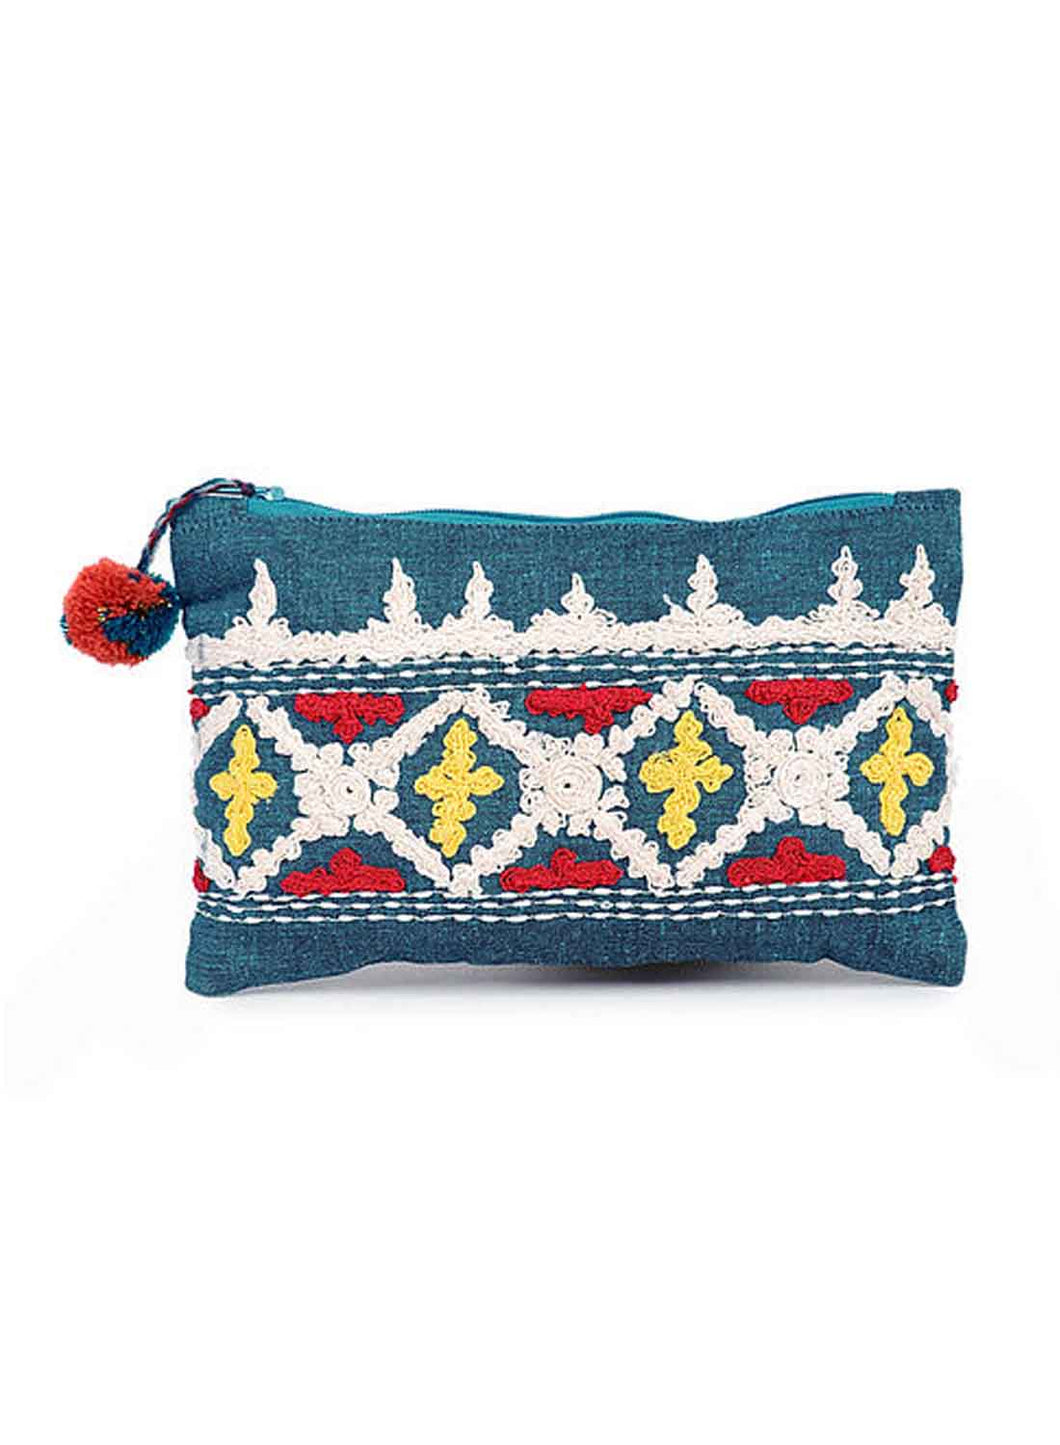 Kanyoga Teal Chambray Base Unique Embroidery Cotton Pouch With Pom Pom Attached For Women